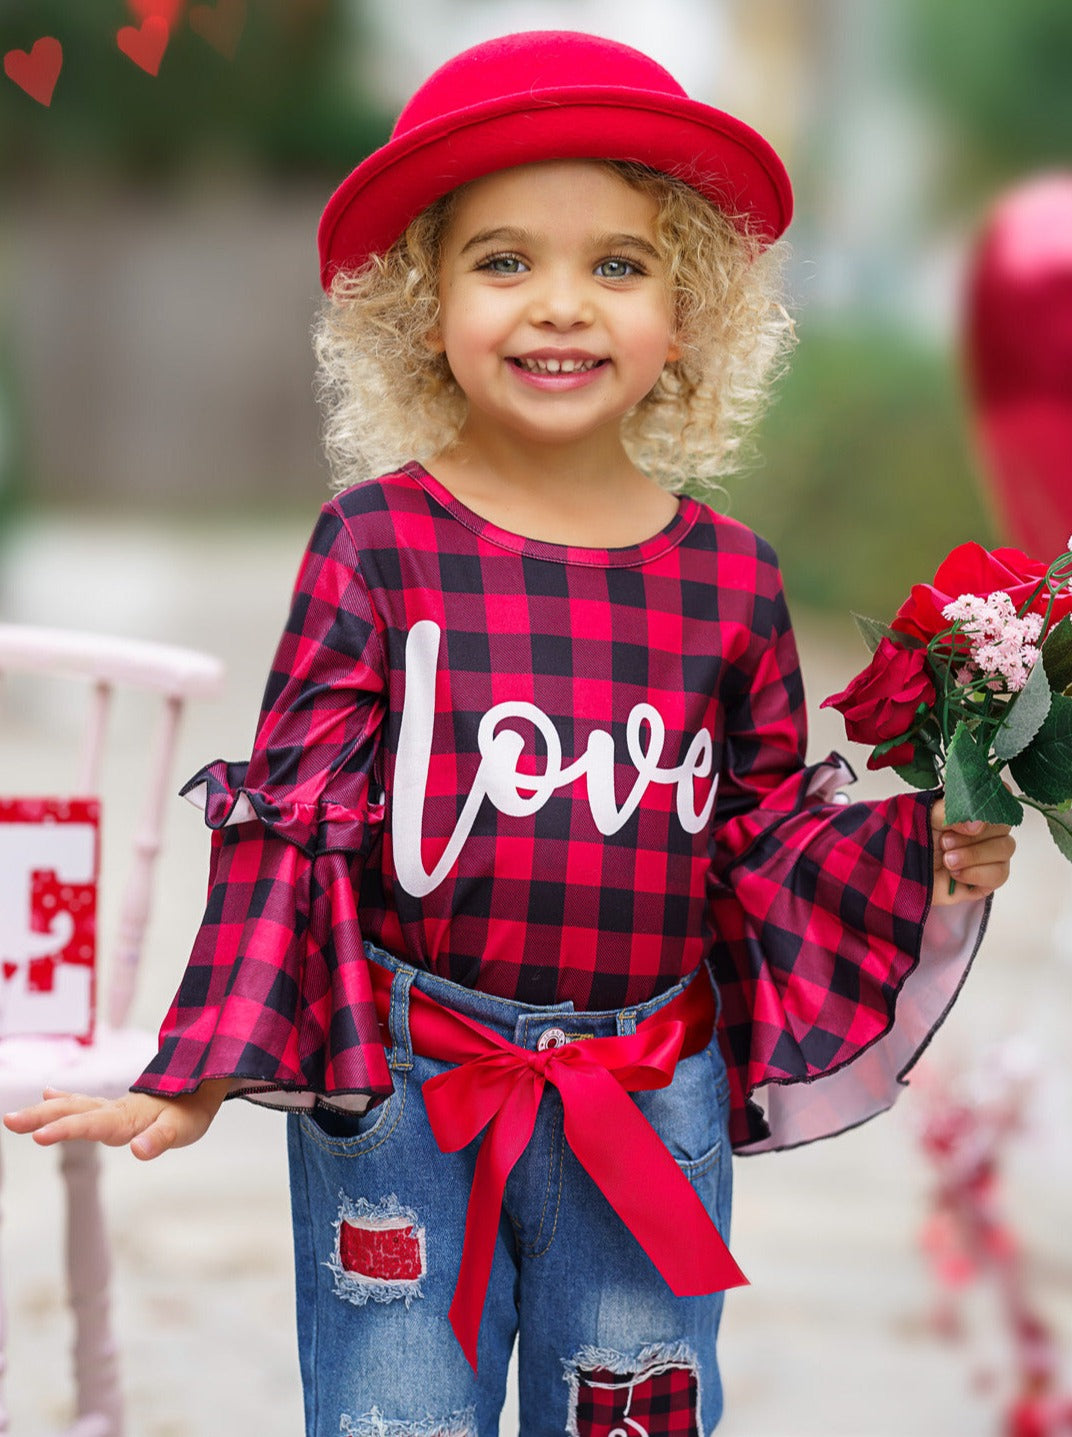 Kids Valentine's Clothes | Girls Plaid Bell Sleeve Top & Patched Jeans